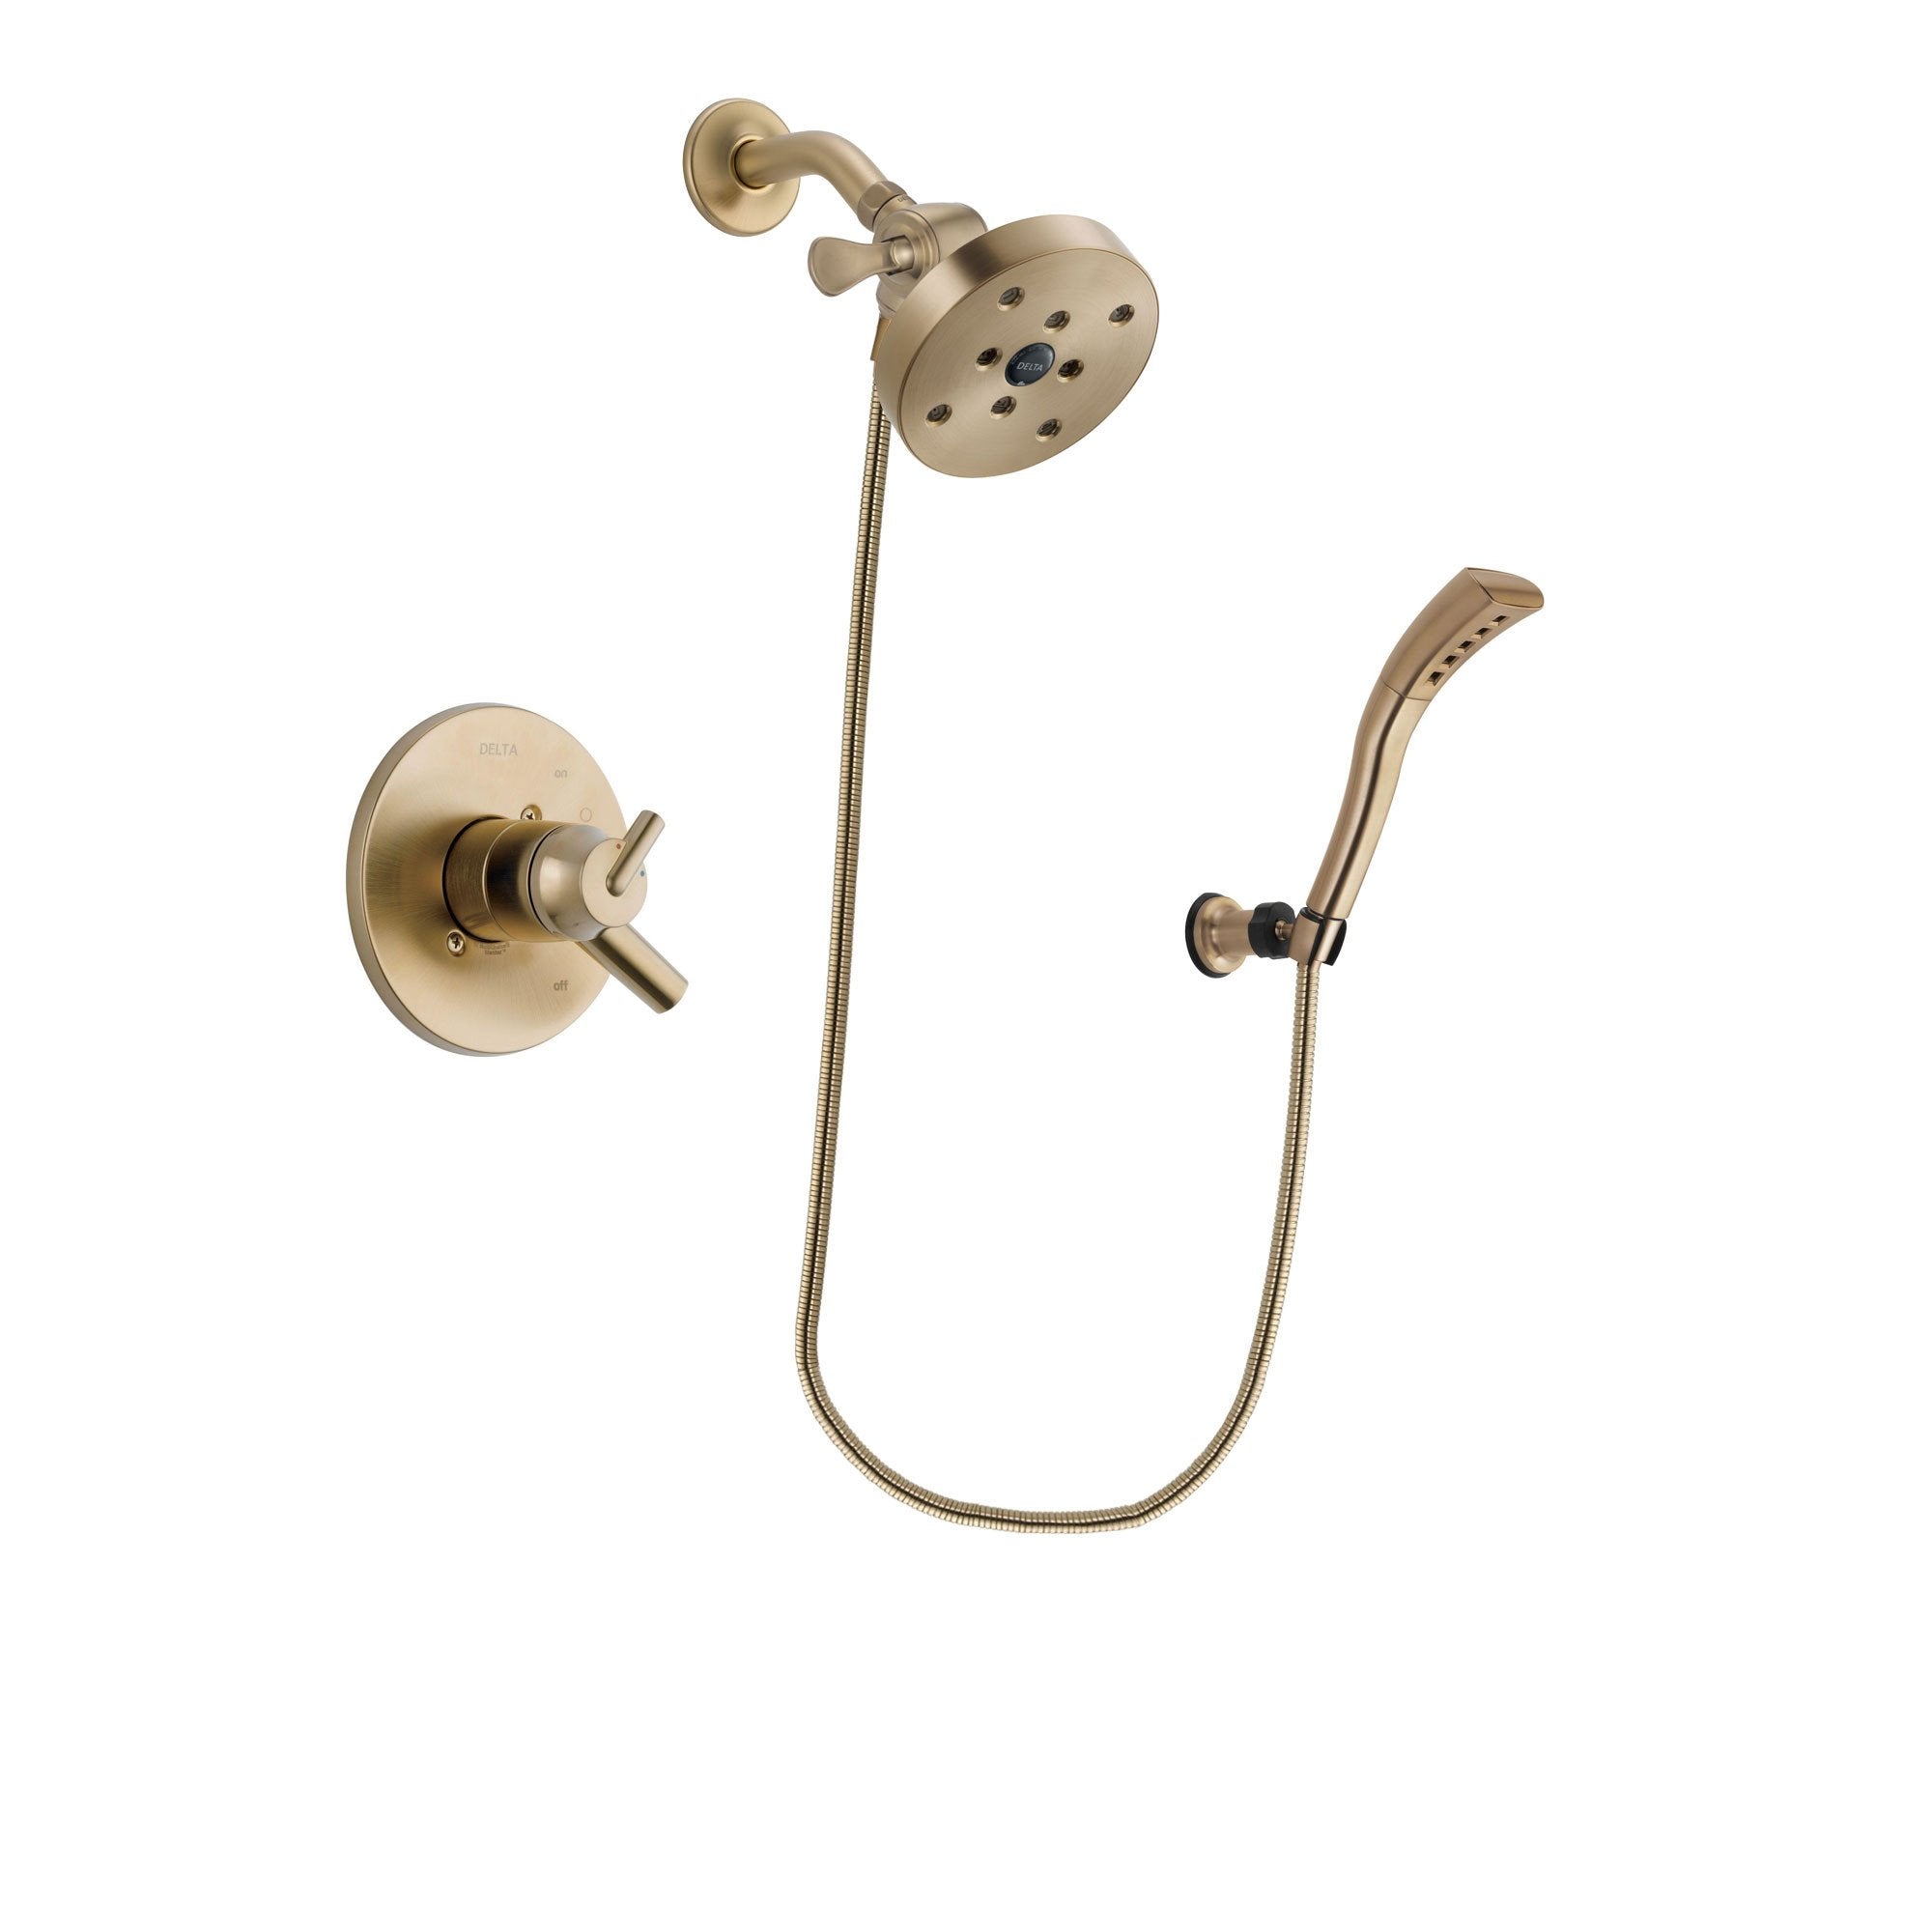 Delta Trinsic Champagne Bronze Finish Dual Control Shower Faucet System Package with 5-1/2 inch Showerhead and Modern Wall Mount Personal Handheld Shower Spray Includes Rough-in Valve DSP3726V